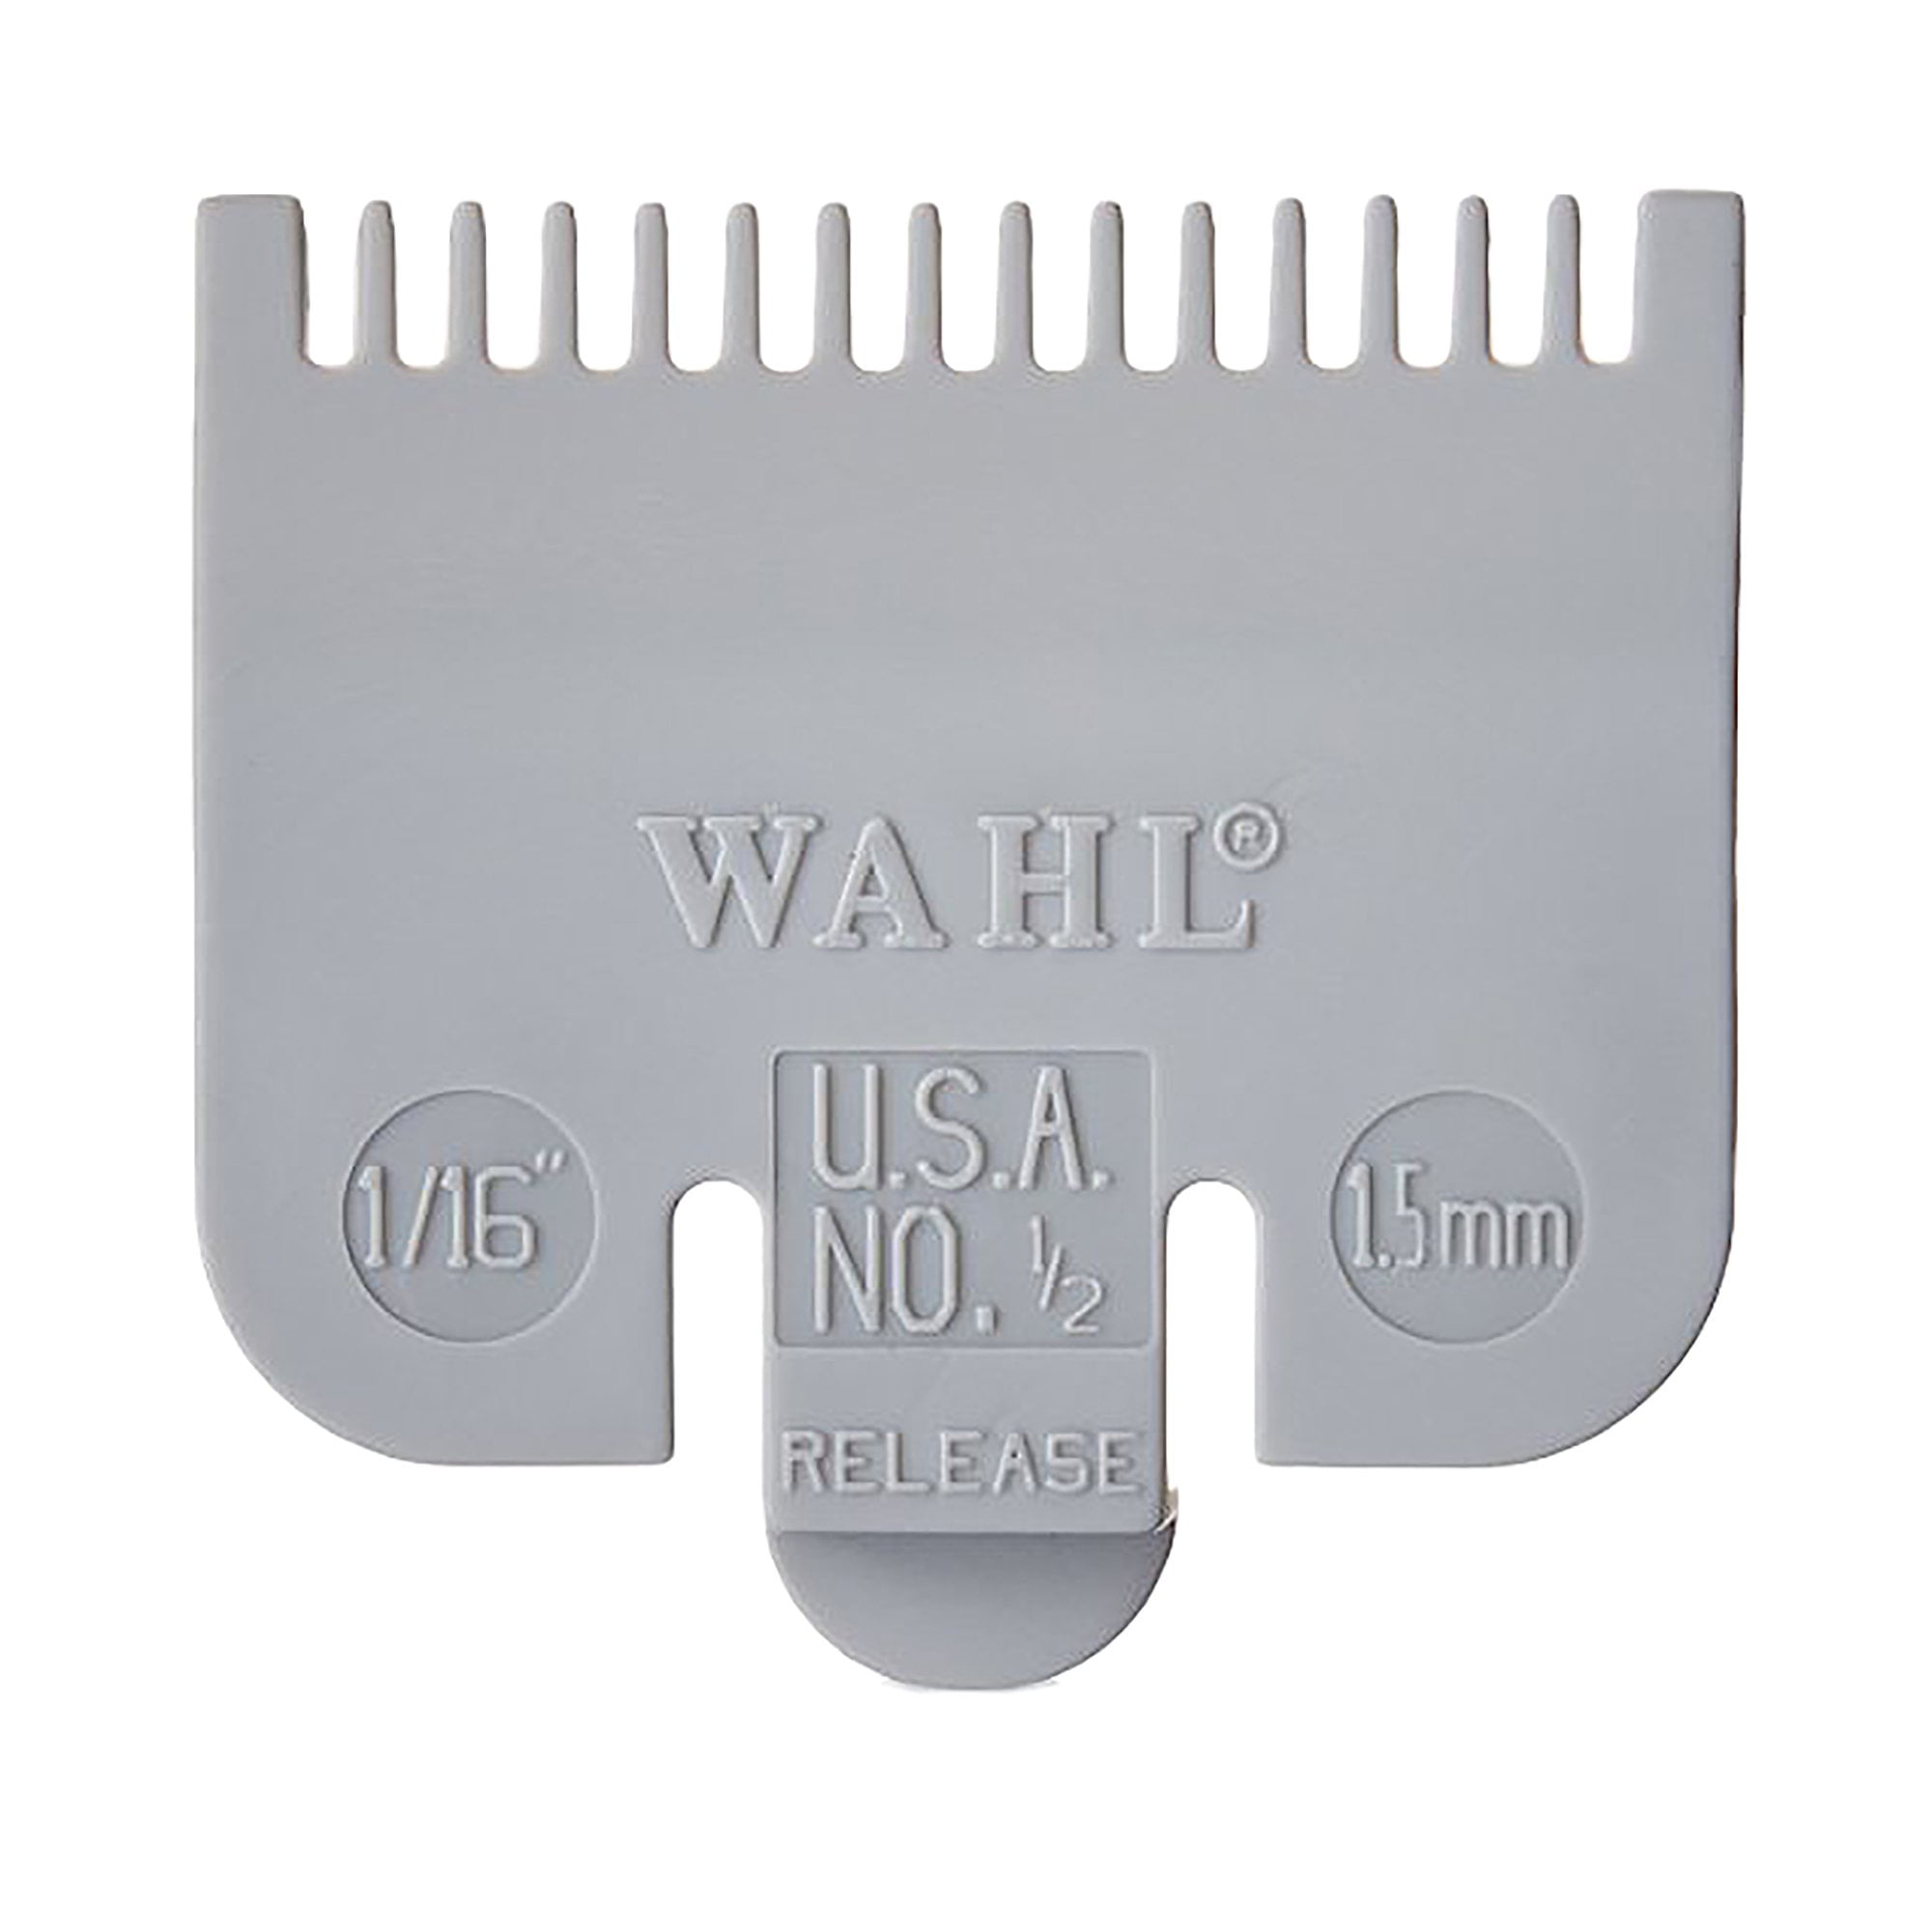 bacon vidnesbyrd fungere WAHL #1/2 Clipper Accessories Combs Guards 1/16" 1,5mm CL-3137-101 -  Walmart.com